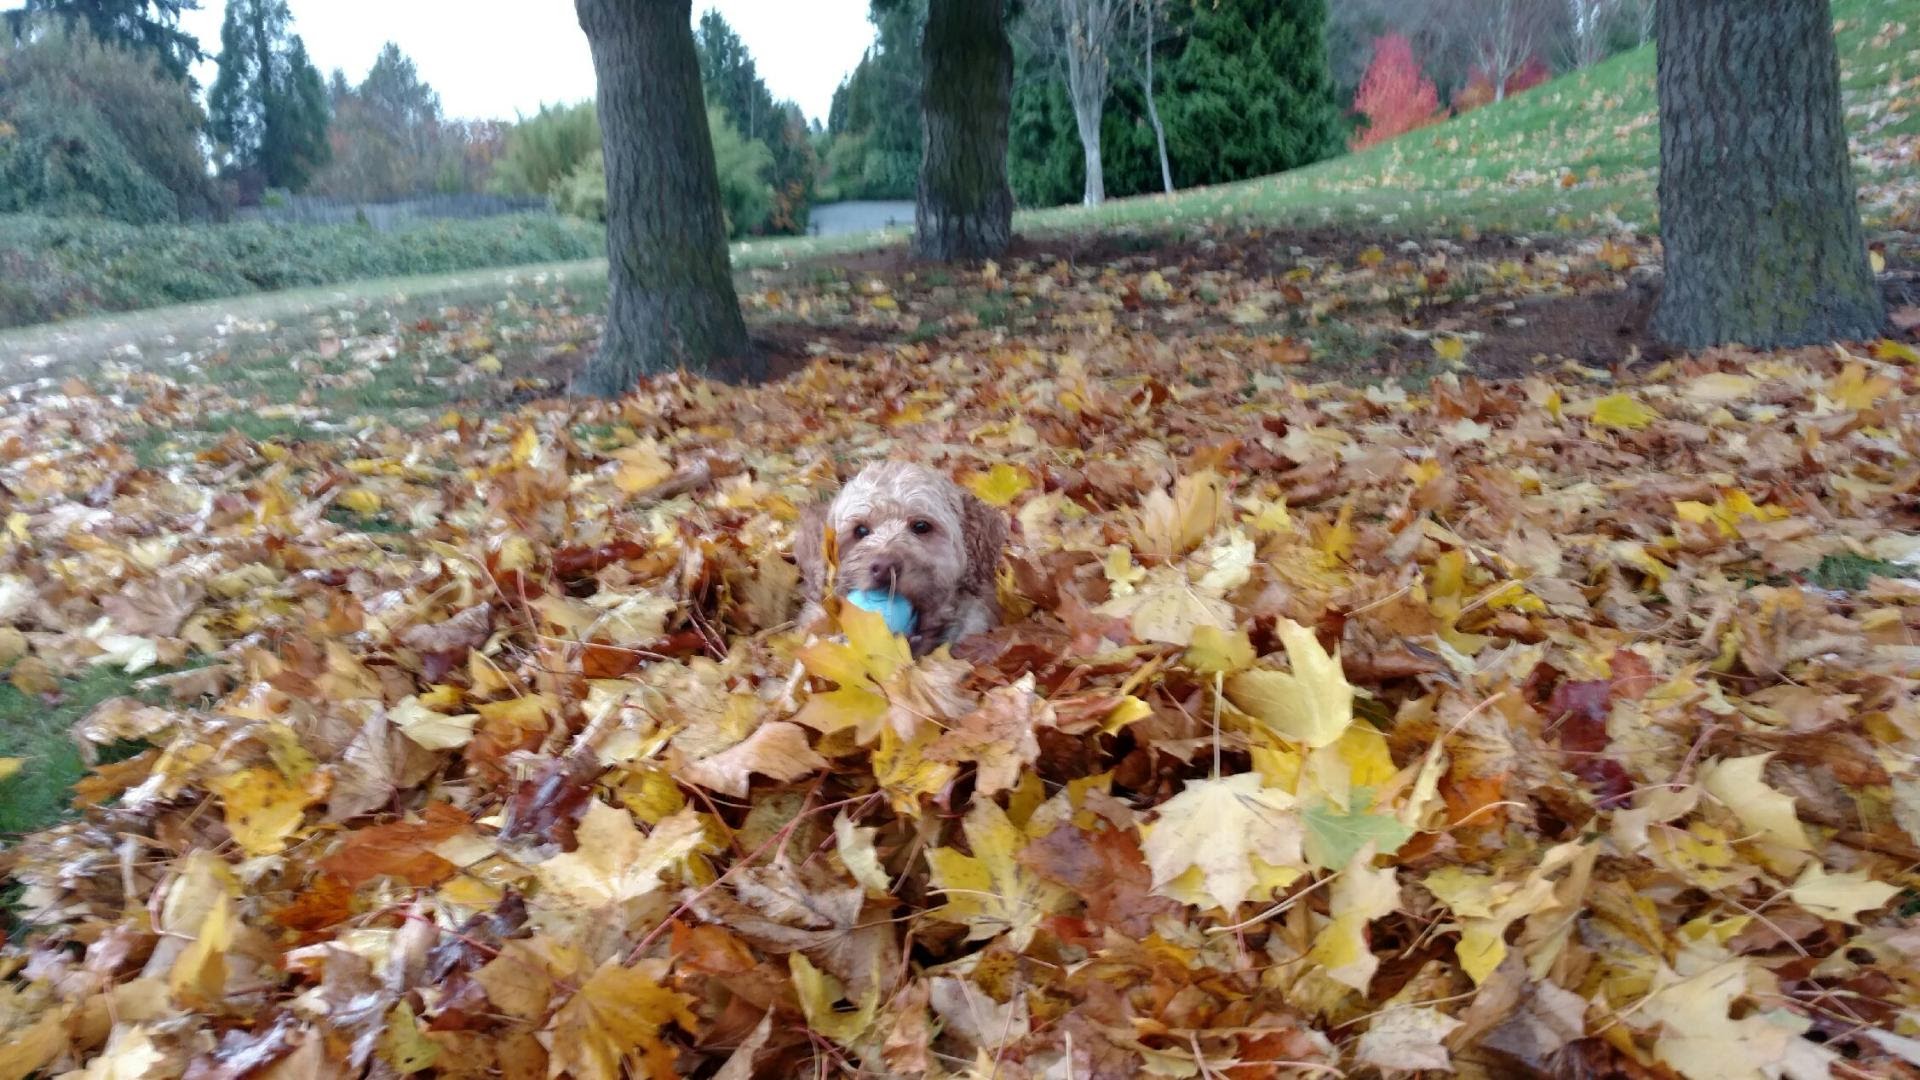 Hachi's head visible in a pile of leaves, a tennis ball in his mouth.